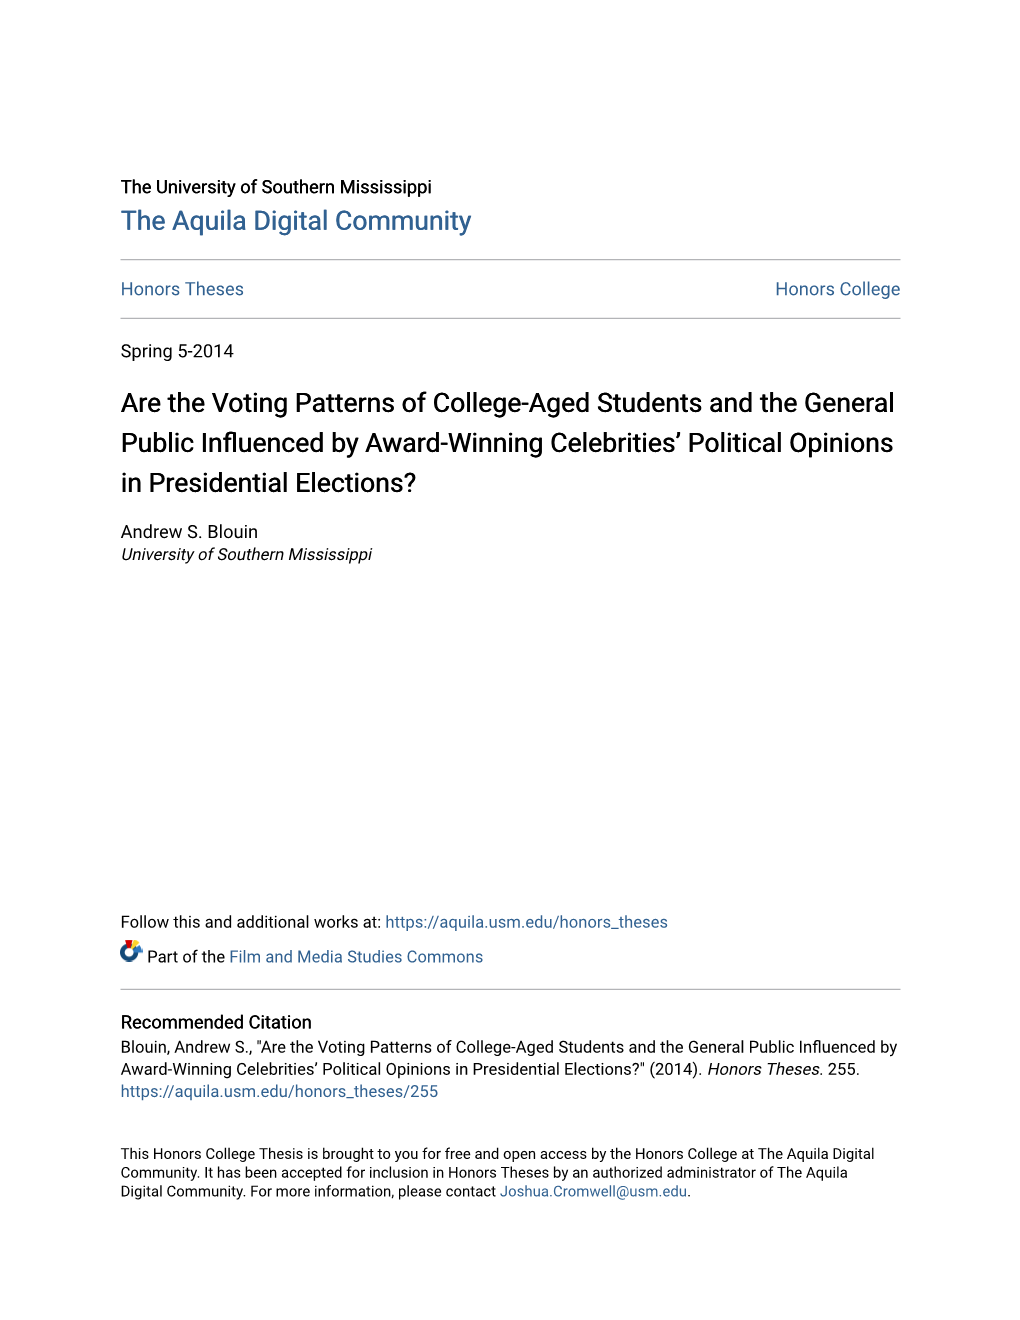 Are the Voting Patterns of College-Aged Students and the General Public Influenced Yb Award-Winning Celebrities’ Political Opinions in Presidential Elections?